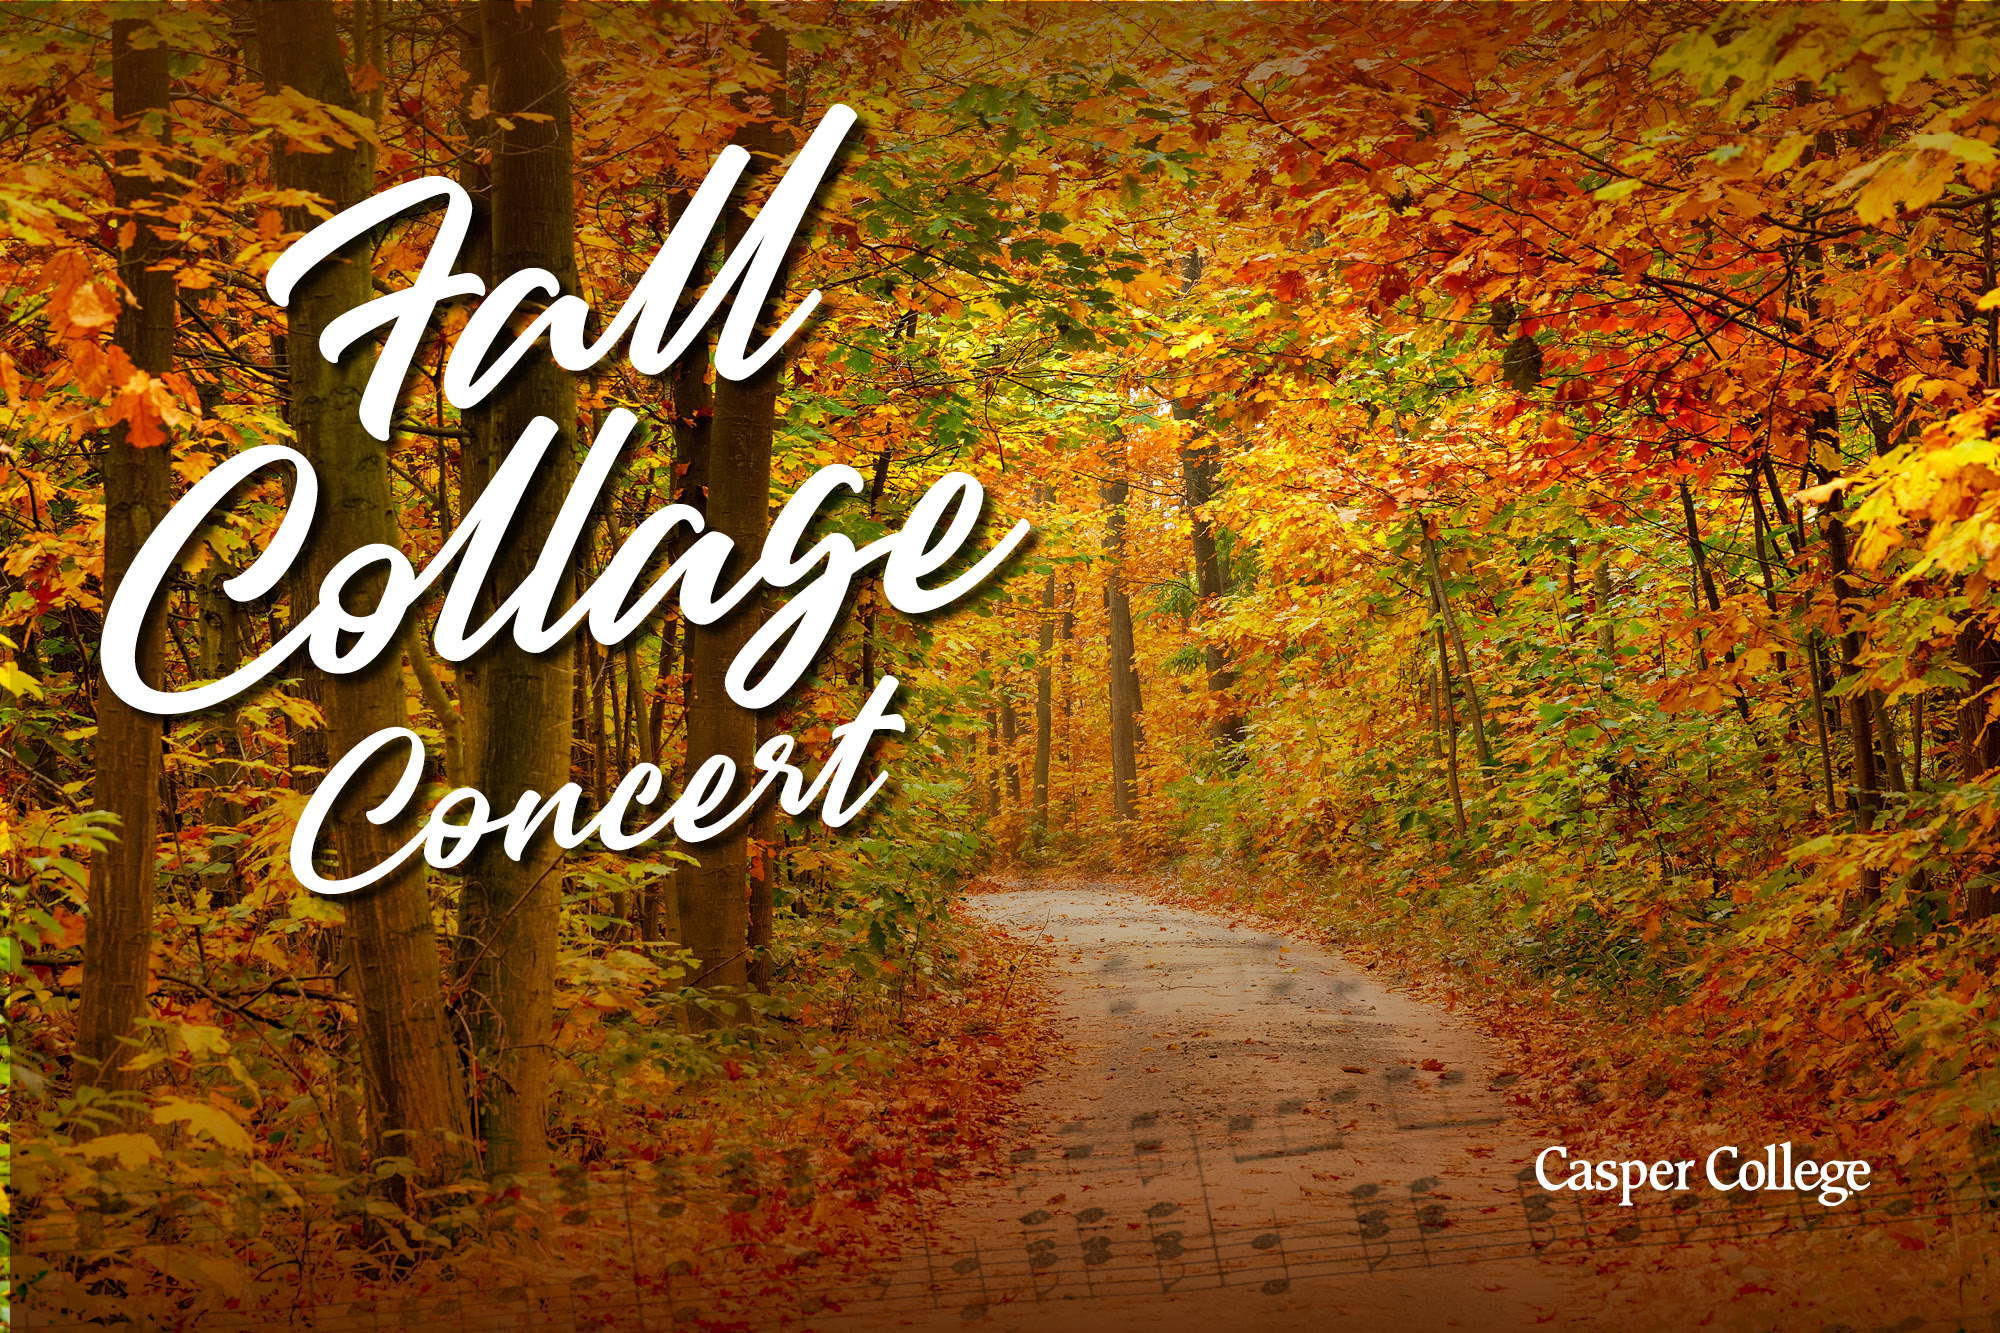 Image for Fall Collage Concert press release.